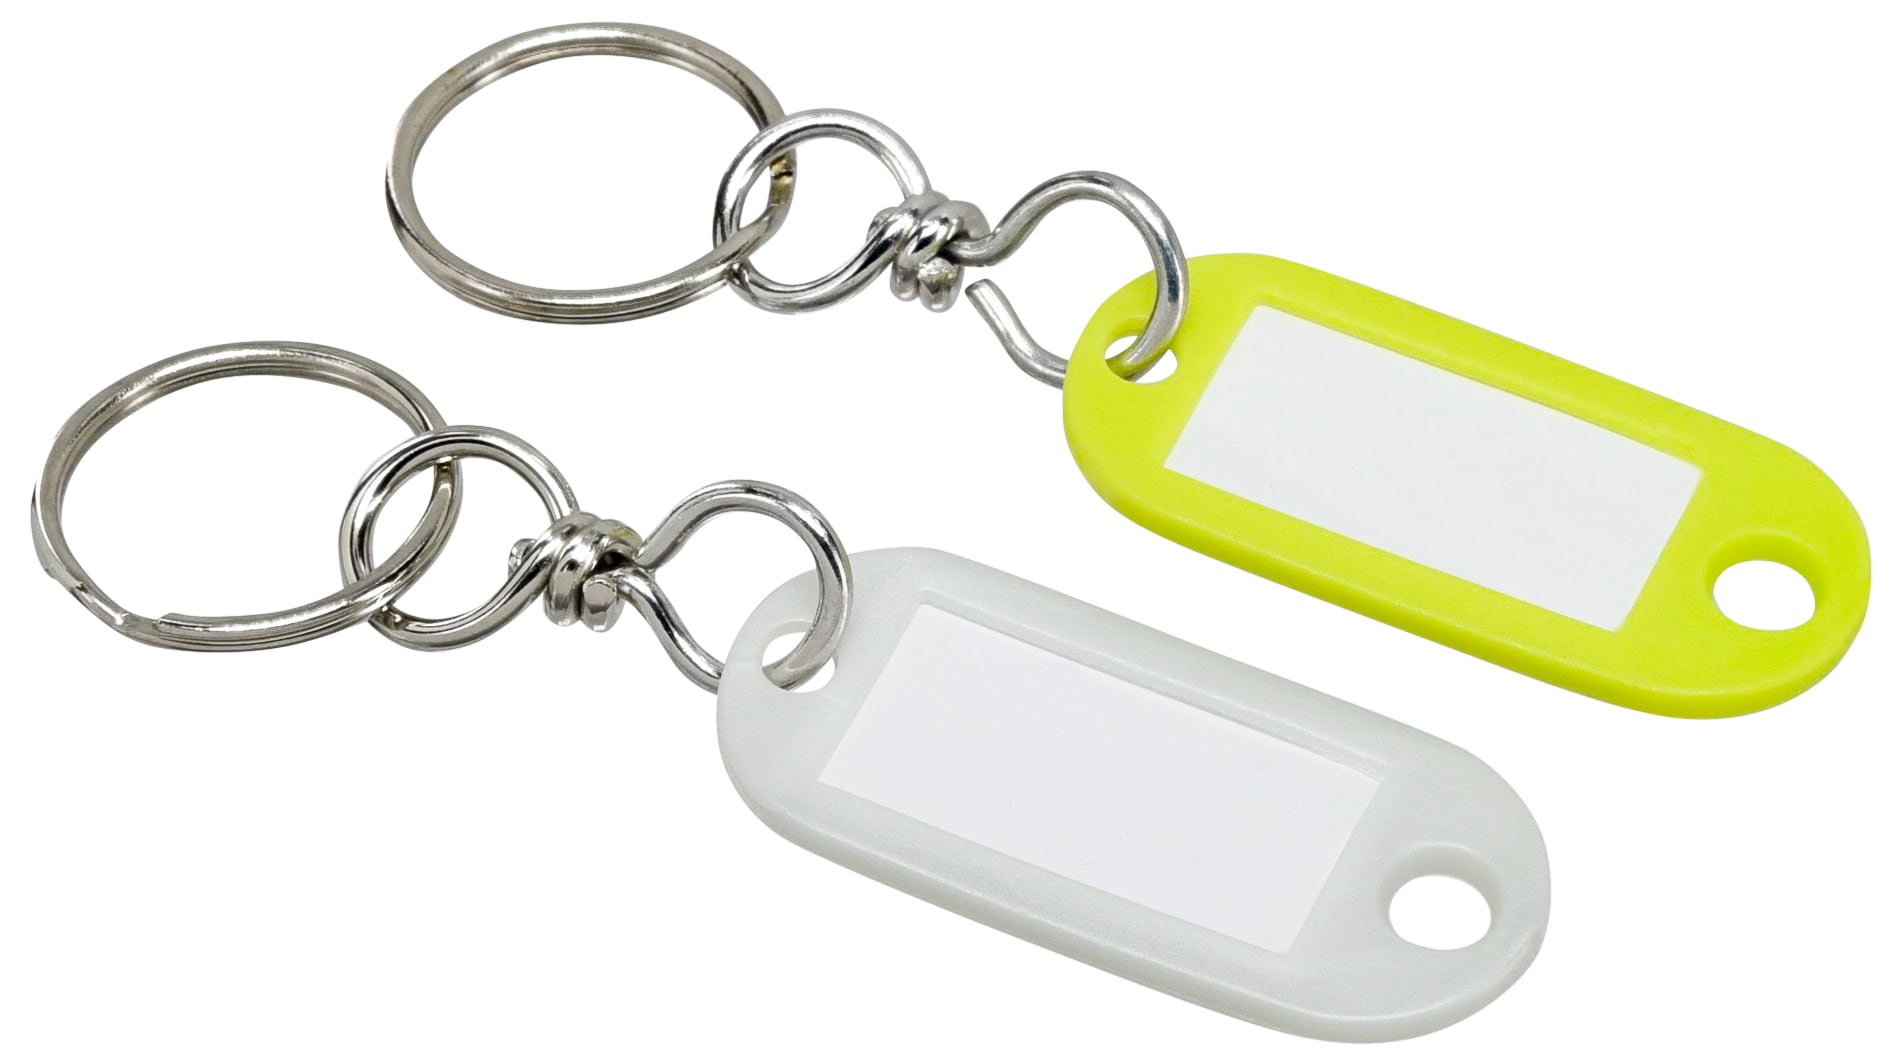 Minute Key Silver Snap-hook Key Ring in the Key Accessories department at